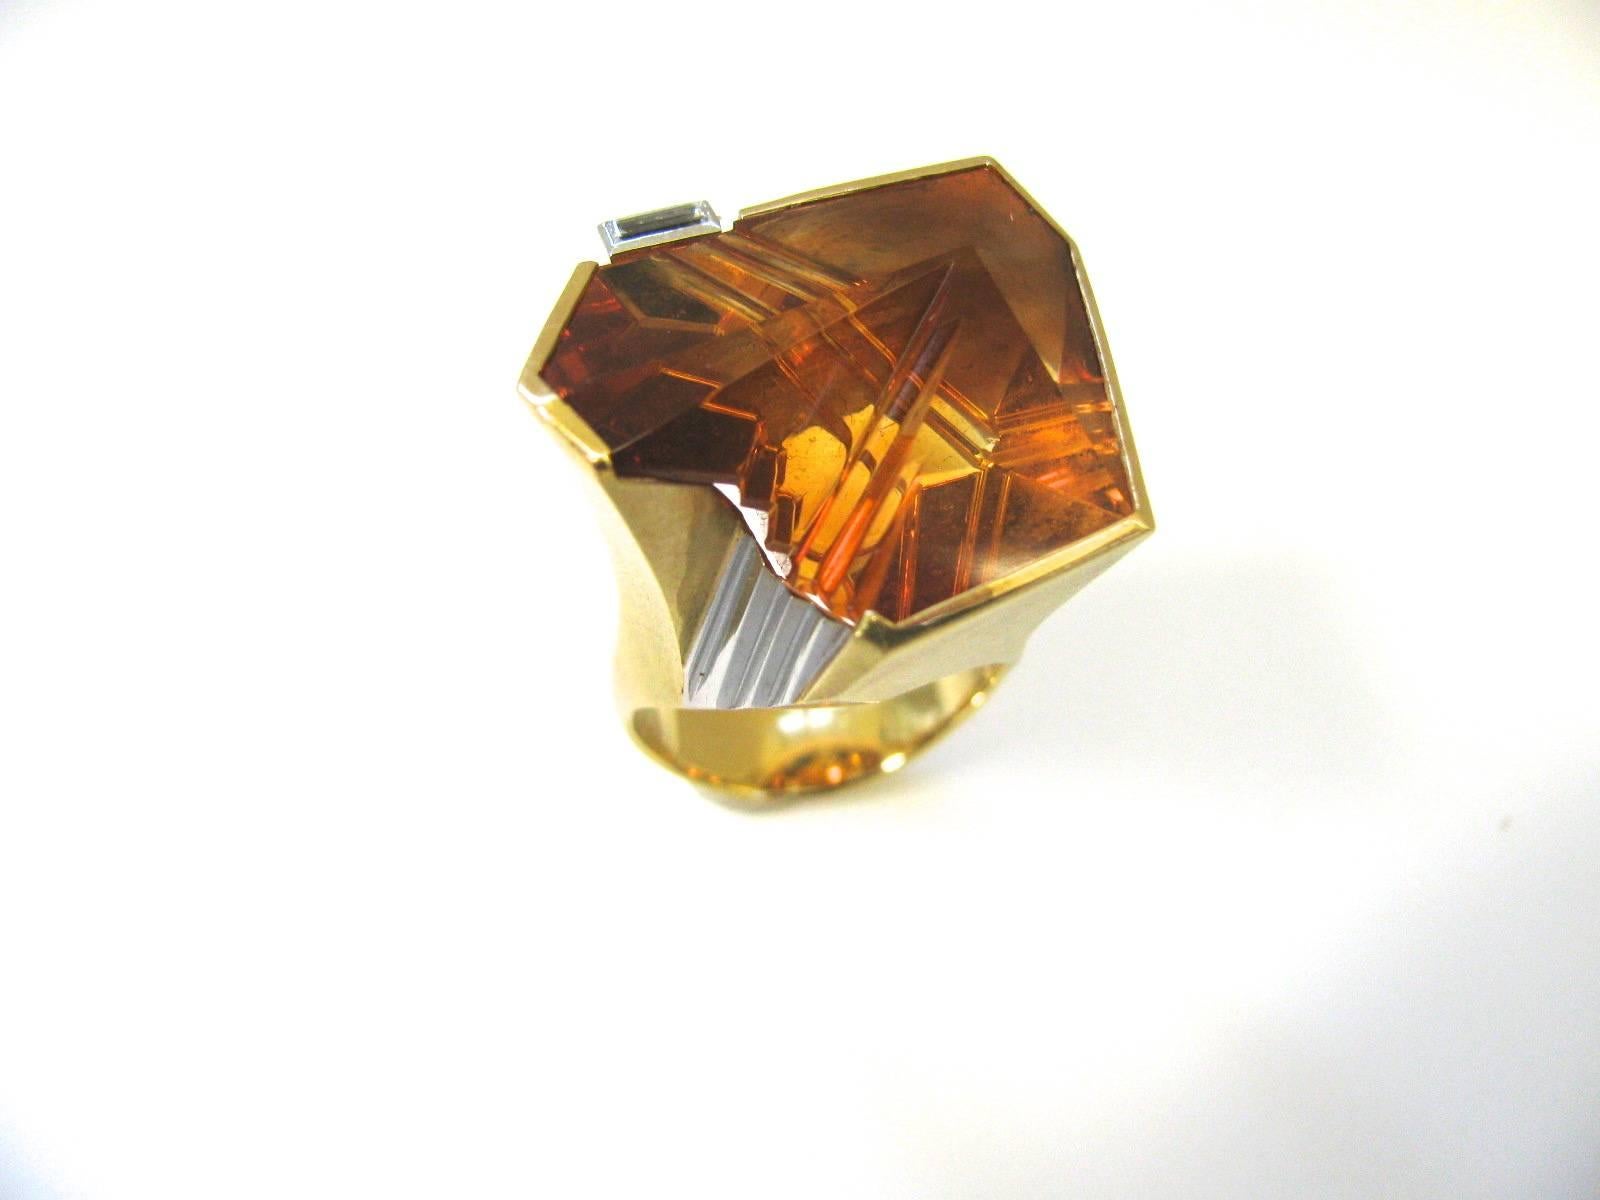 An artistic ring by Atelier Munsteiner. The 18k Yellow and white gold geometric satin finished shank with a 1